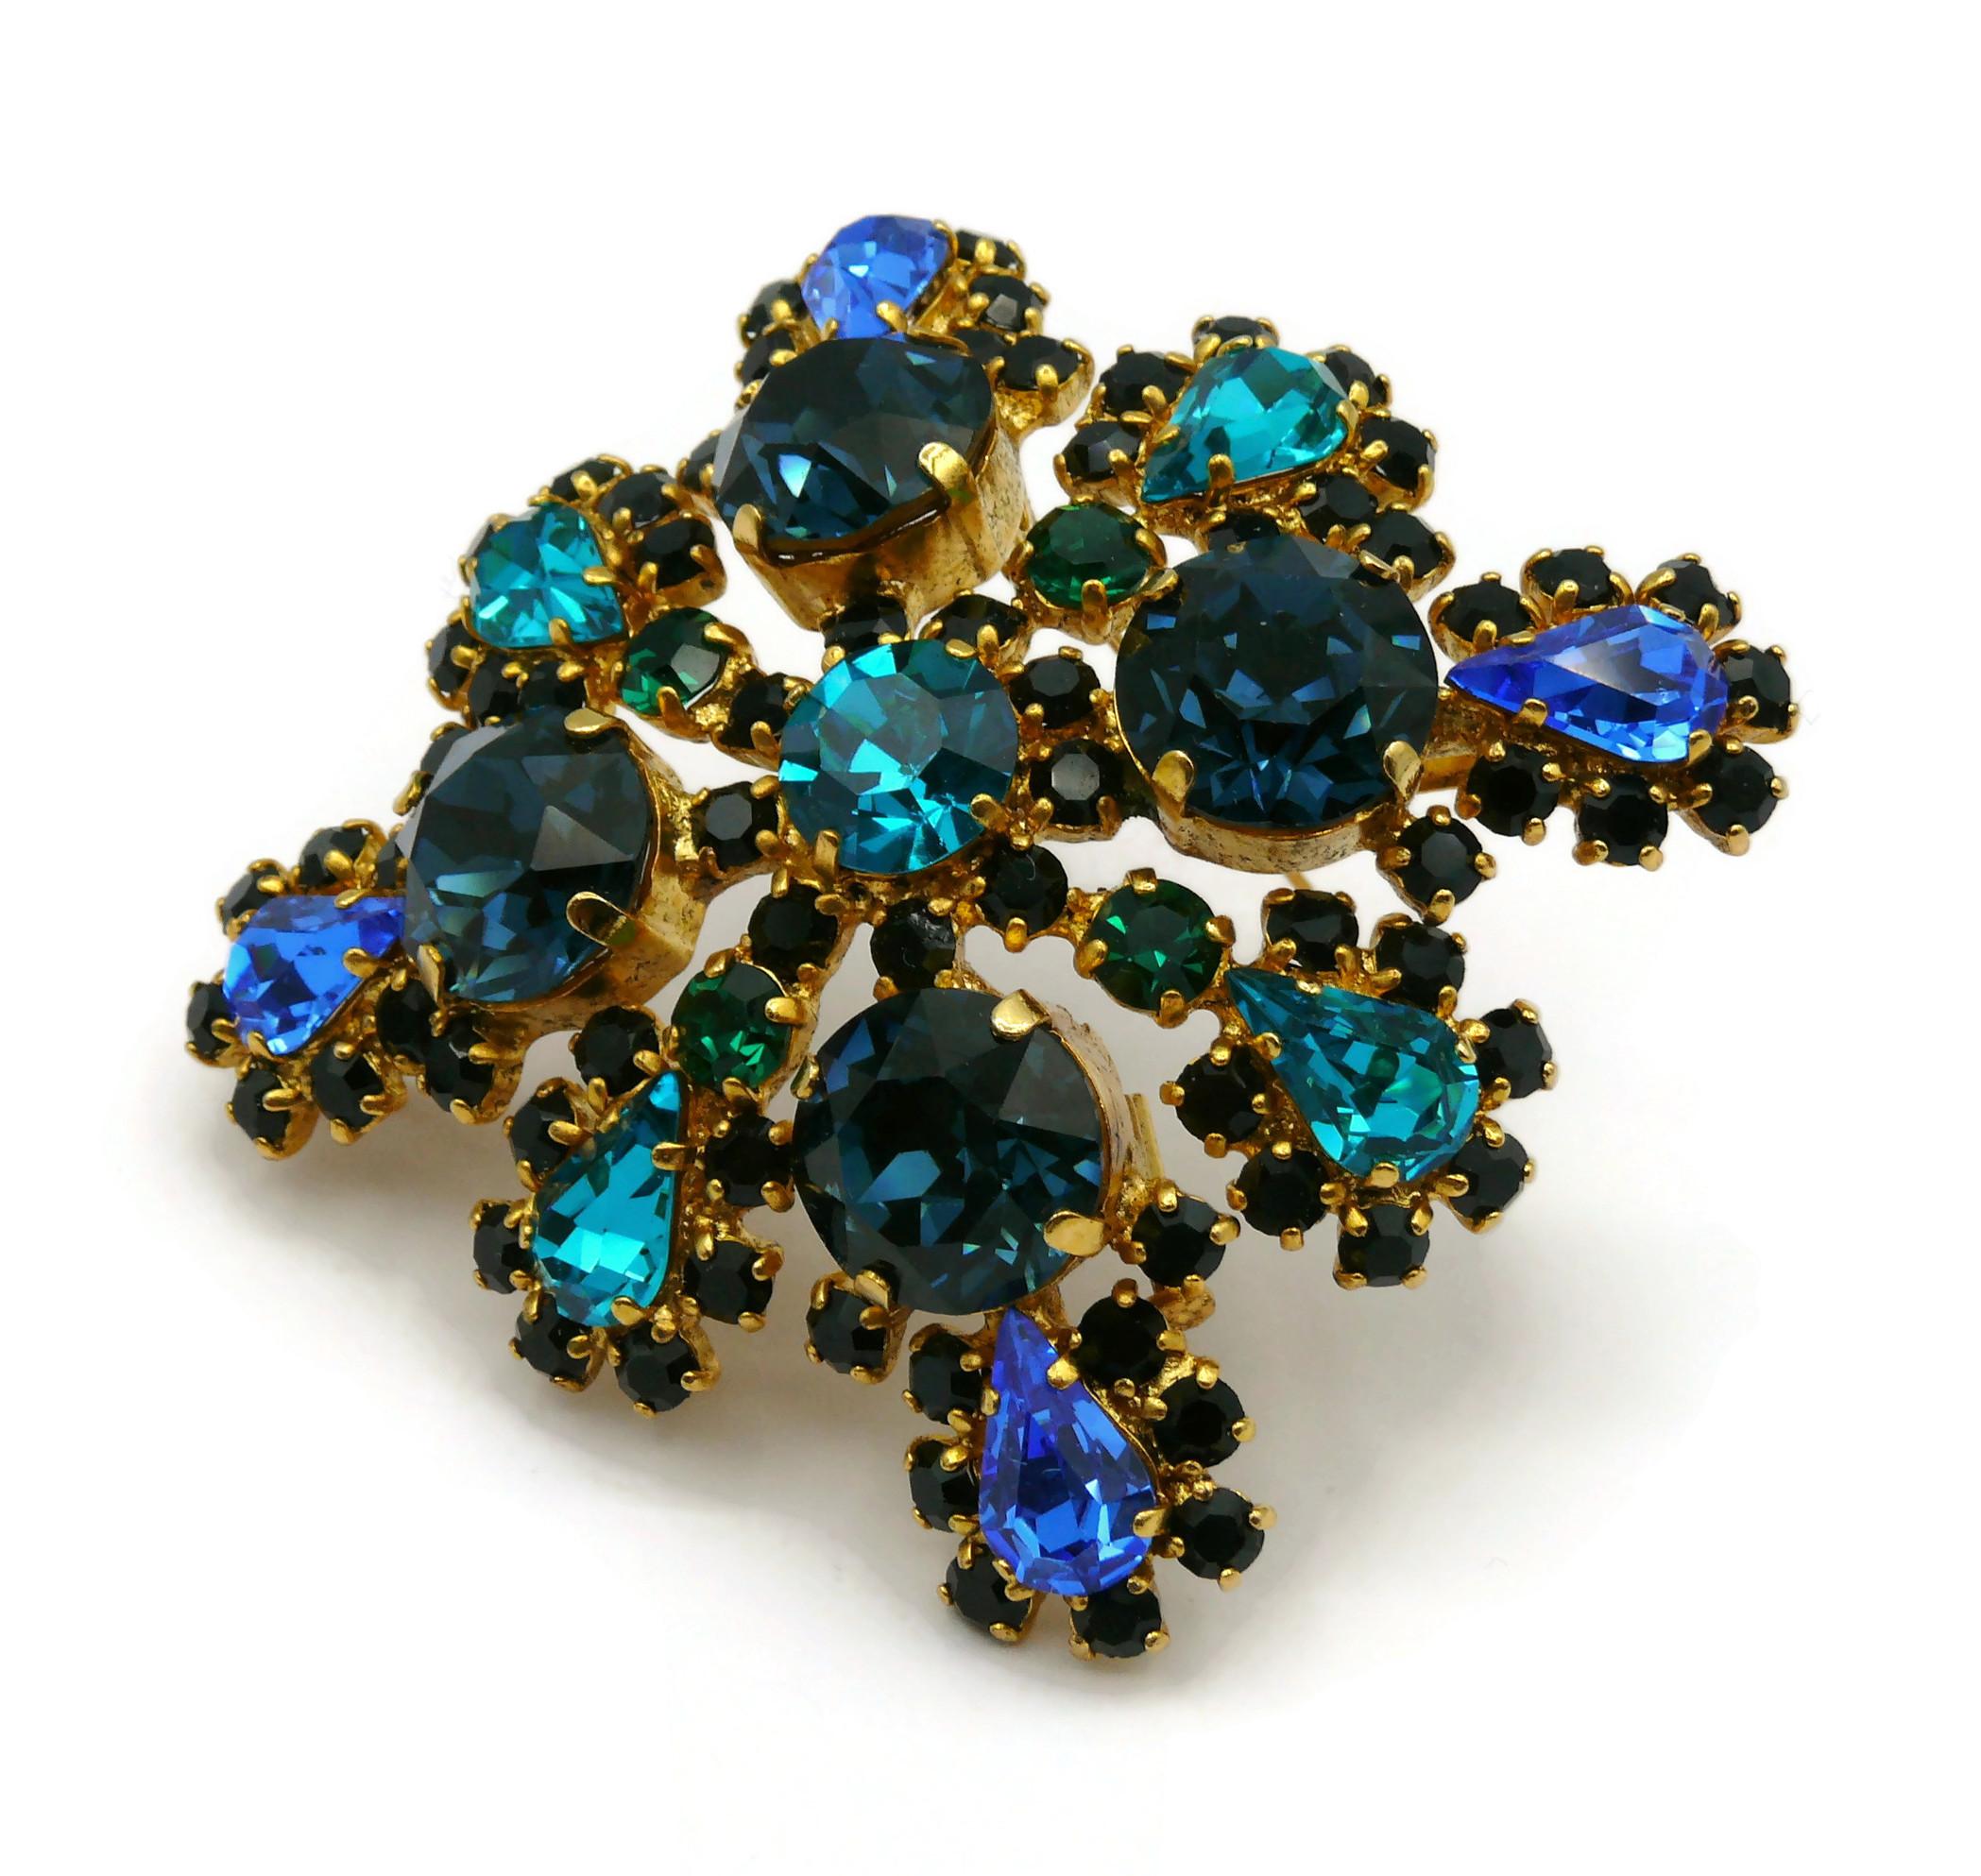 CHRISTIAN DIOR by GIANFRANCO FERRE Vintage Massive Jewelled Brooch Pendant For Sale 2